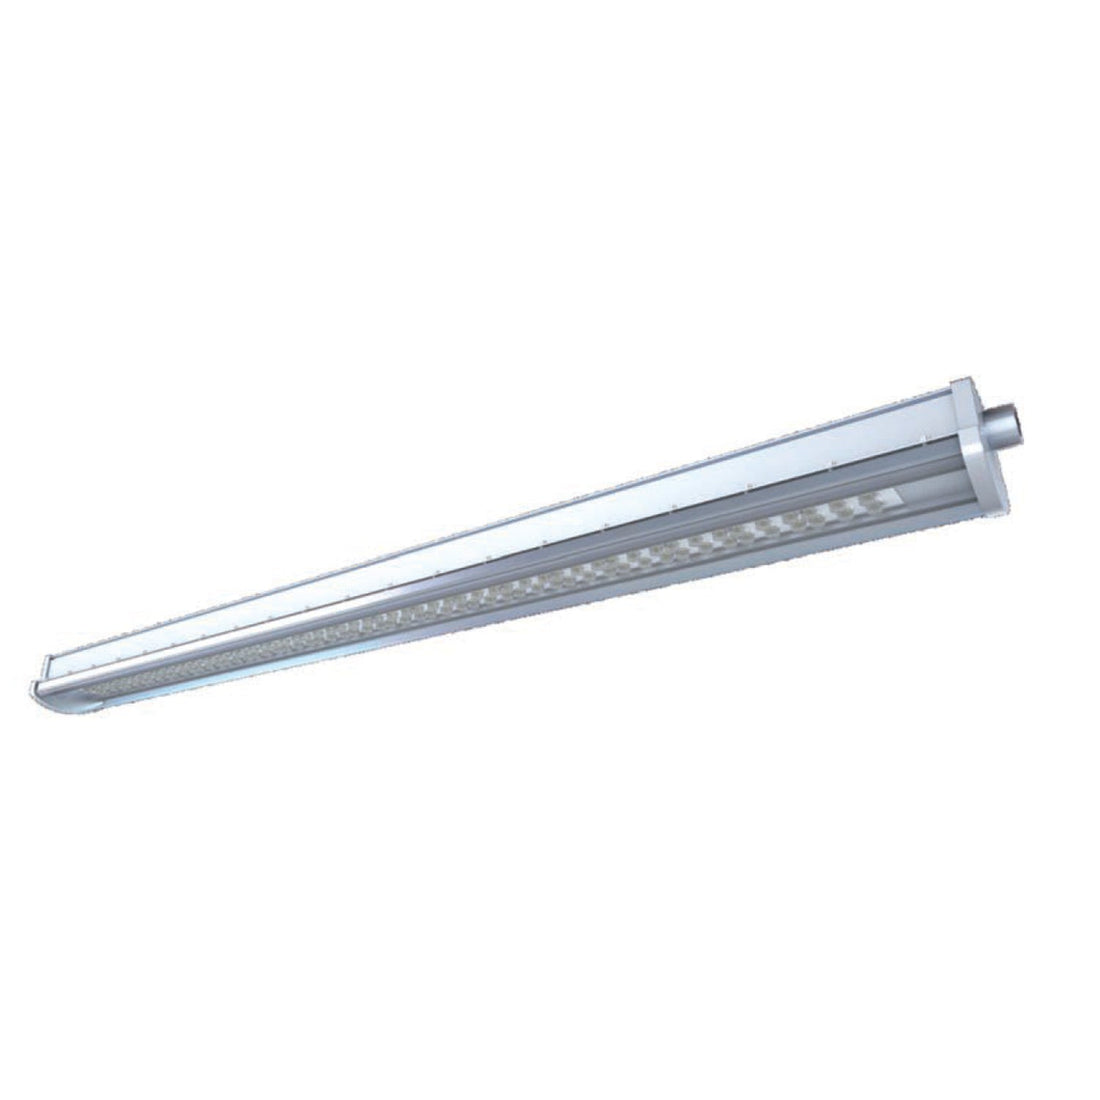 2FT LED Explosion Proof Low Bay Linear Light - 40W - 5000K Daylight, 5600LM, 0-10V Dimming, IP66 Rated, Hazardous Location Lighting Fixtures